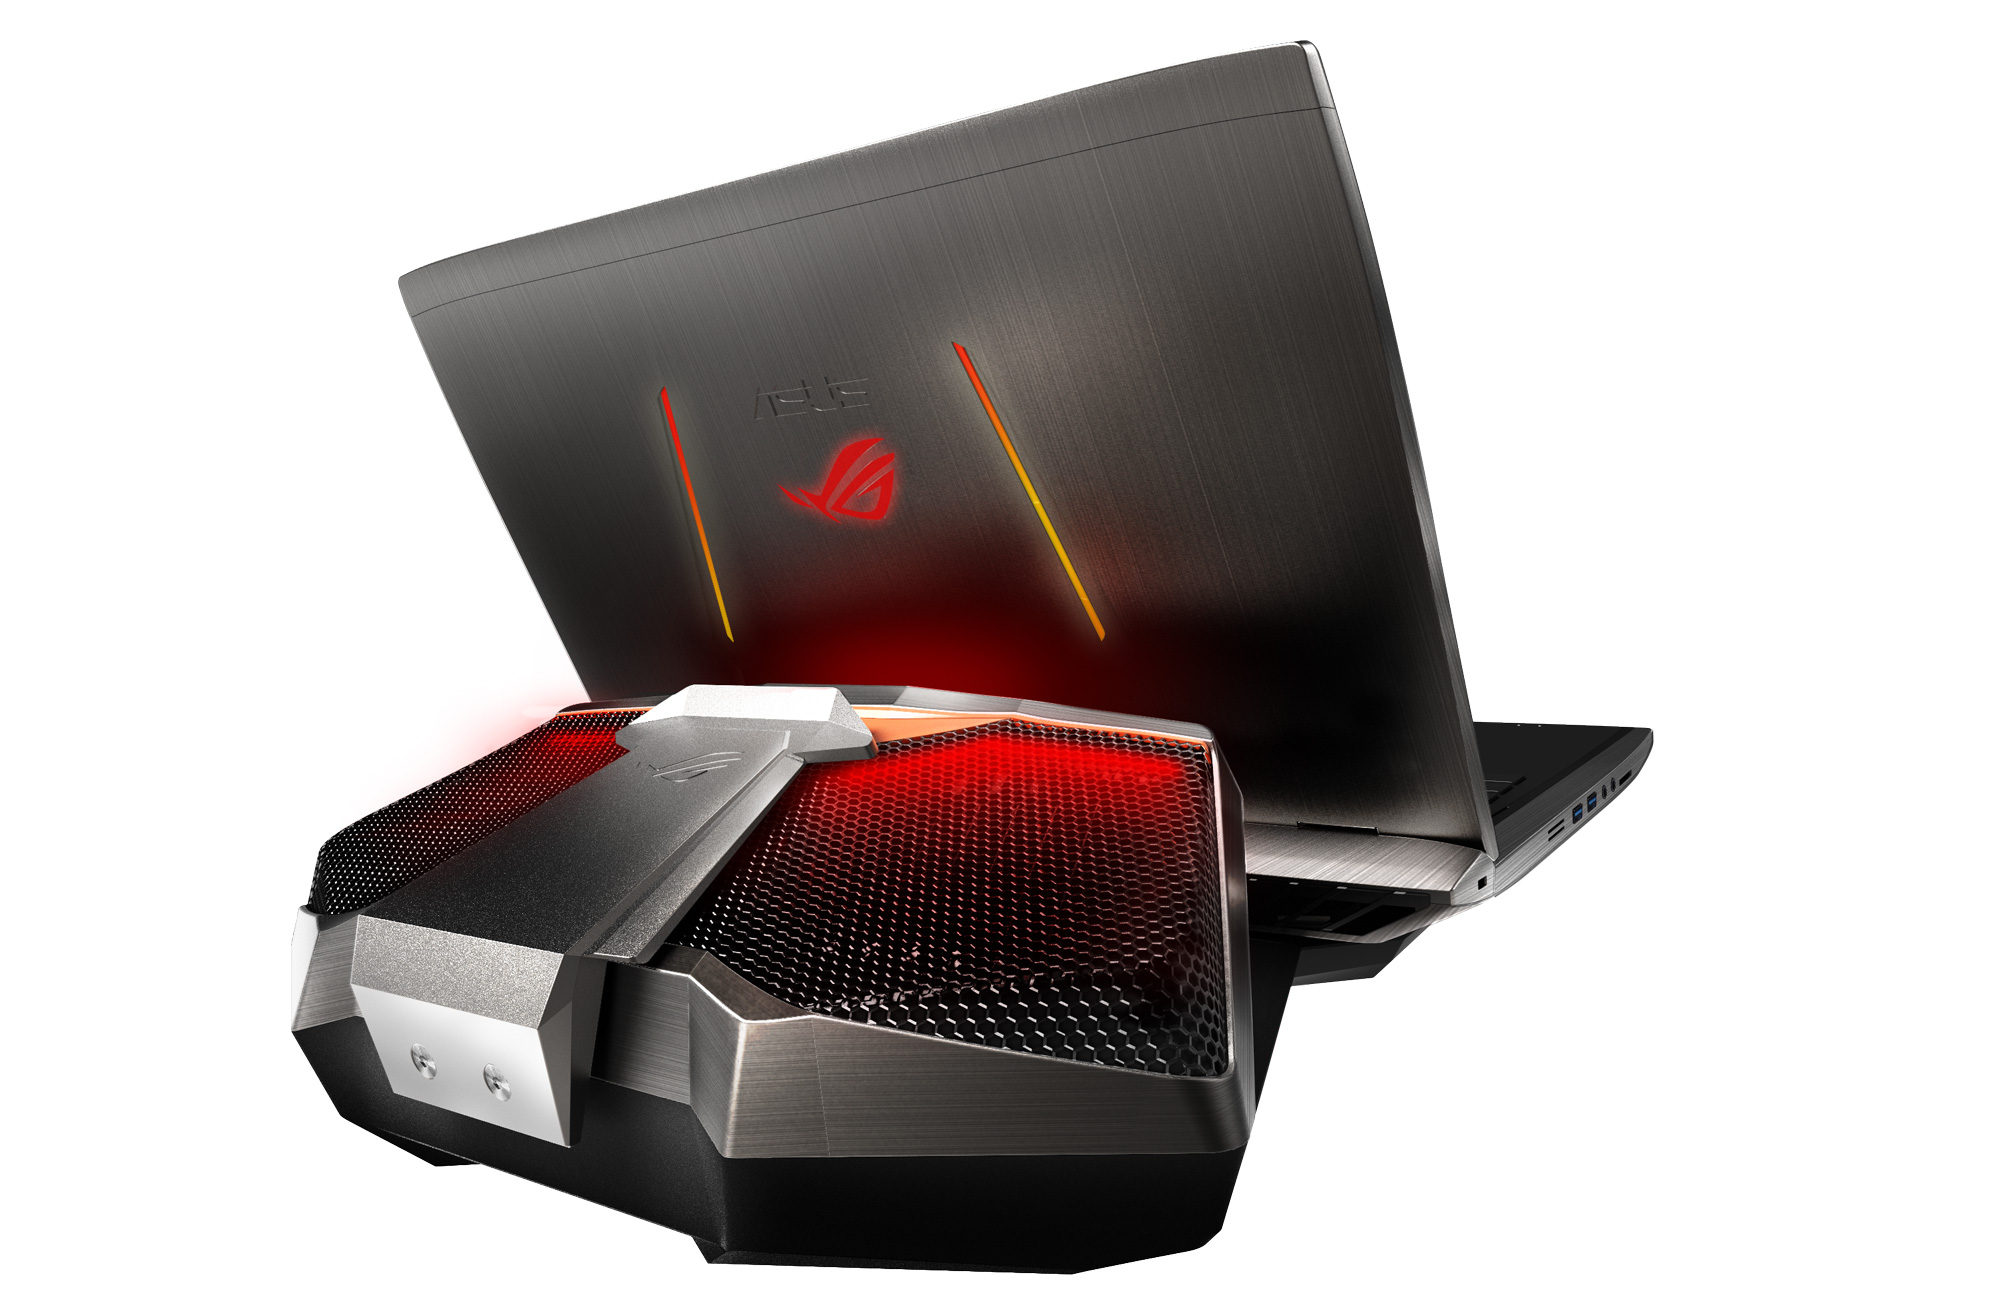 ASUS ROG unveils new lineup at IFA 2015 38